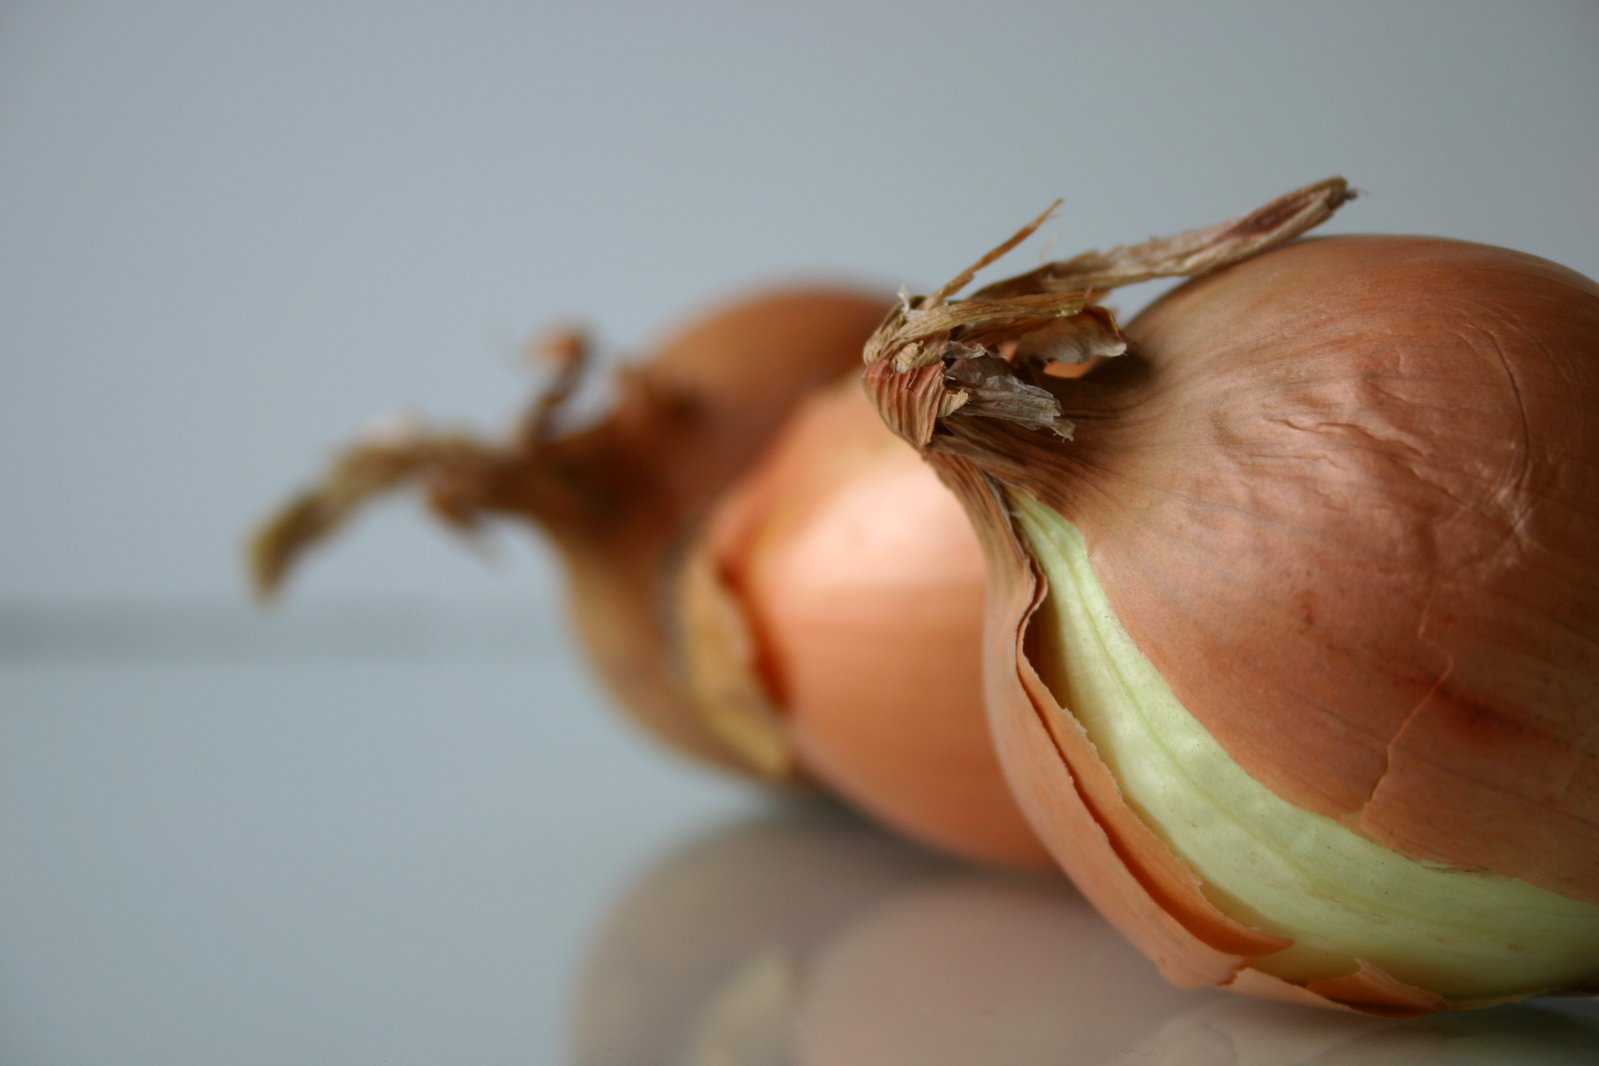 a onion is half - peeled and half - empty